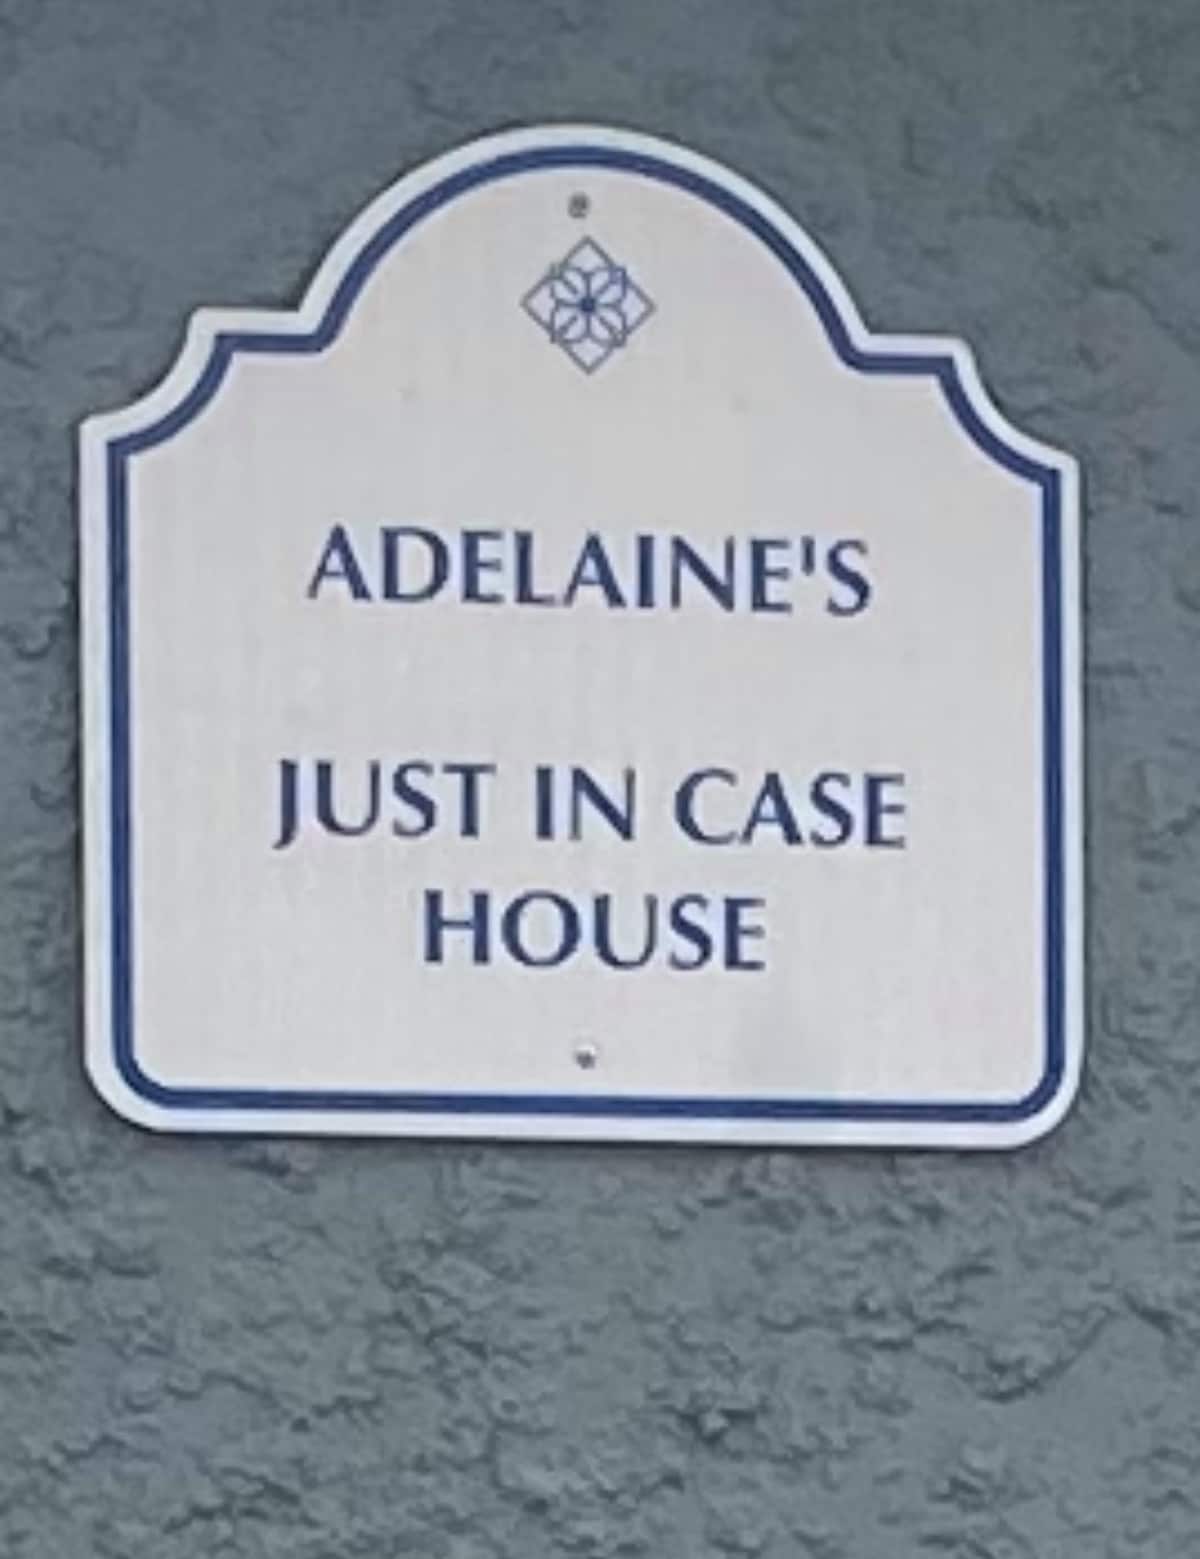 Adelaine 's Just-in-Case House